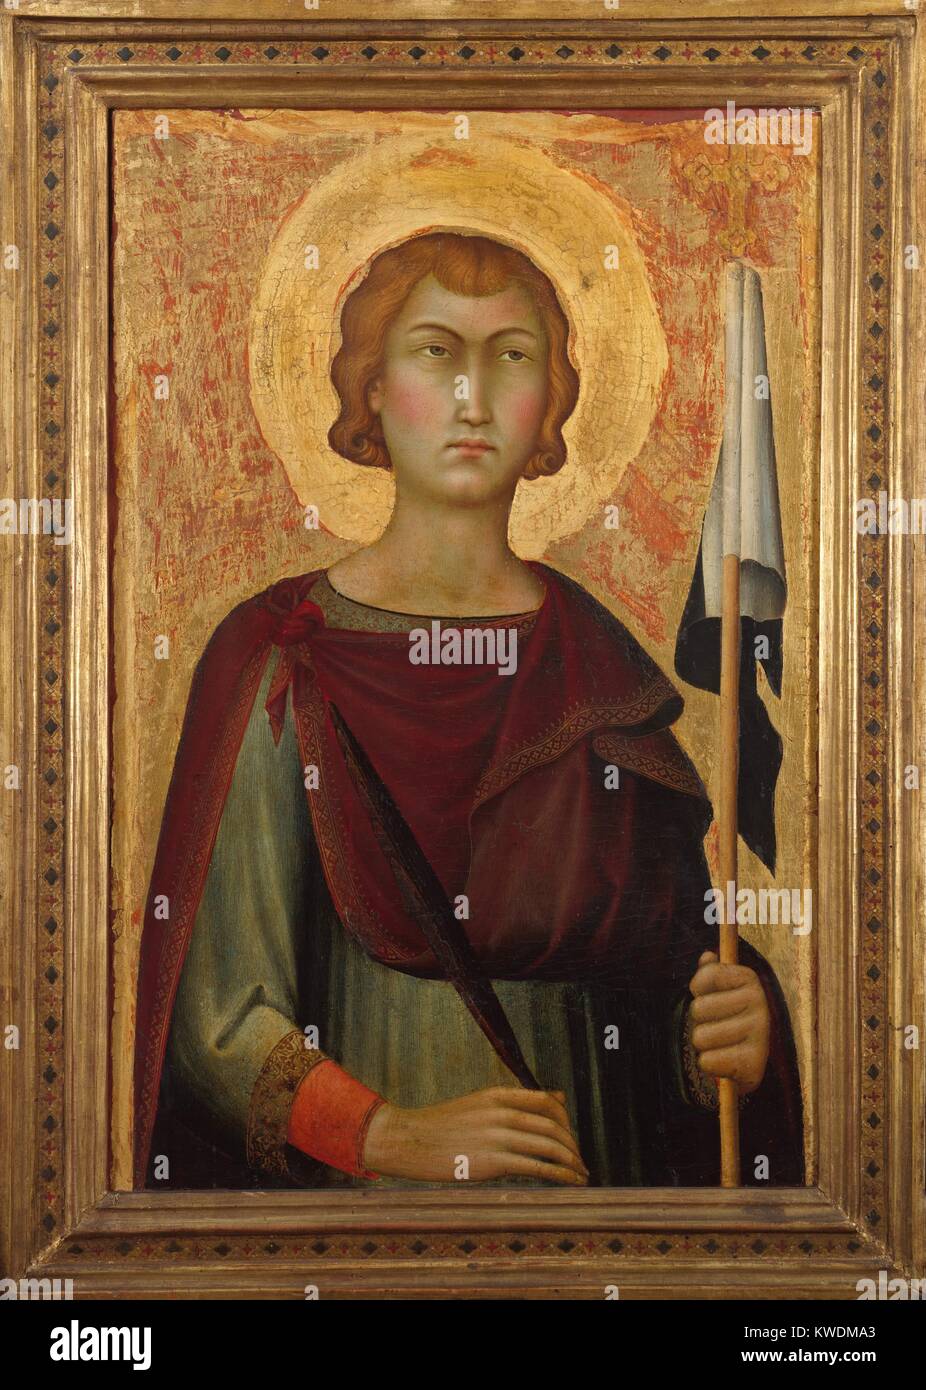 SAINT ANSANUS, by Simone Martini, 1326, Italian Proto-Renaissance painting, tempera on wood. At age 19, Ansanus openly declared his Christian faith during the persecutions of Diocletian. As a prisoner in Siena, he preached and was decapitated by order of Roman Emperor Diocletian in 304. Ansanus became Sienas patron saint and holds its black and white banner (BSLOC 2017 16 63) Stock Photo